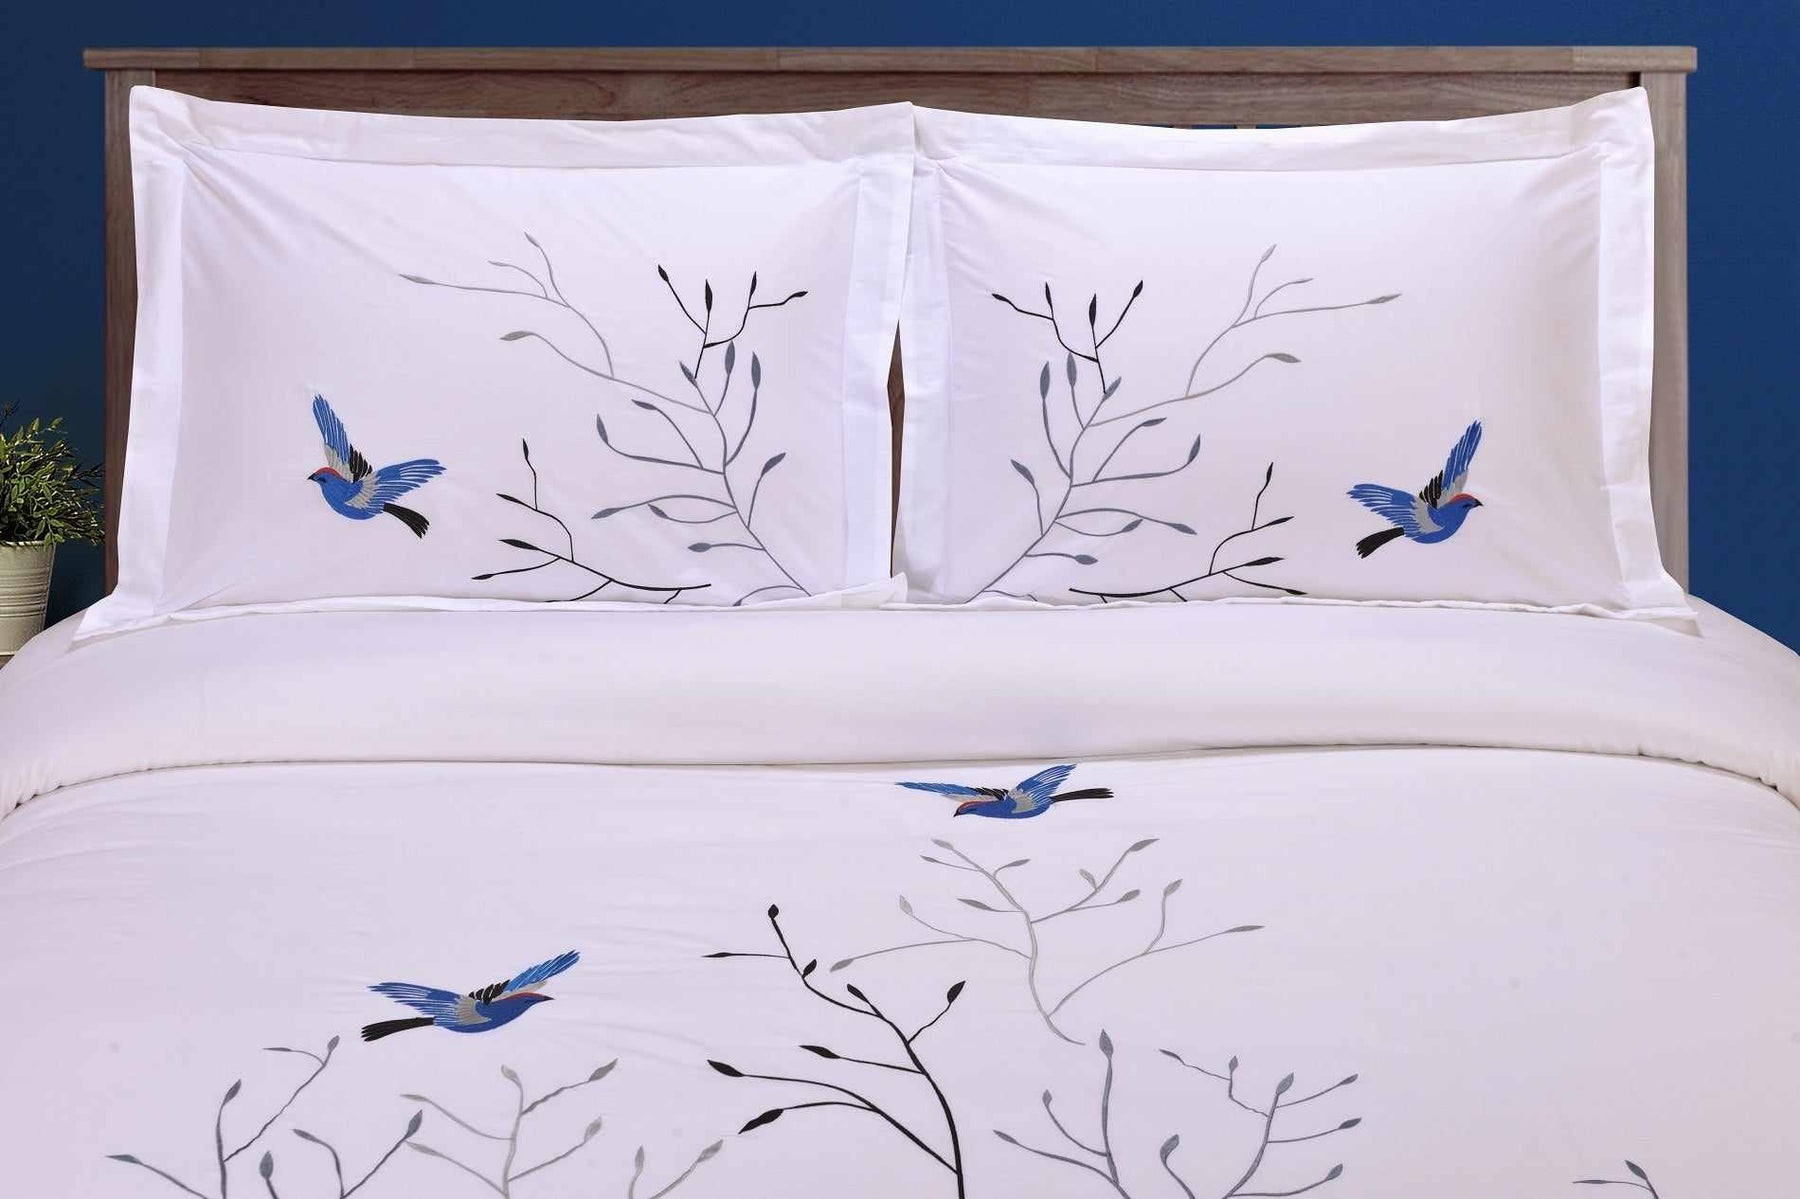 Superior Embroidered Swallow and Floral Cotton Duvet Cover Set - Medium Blue